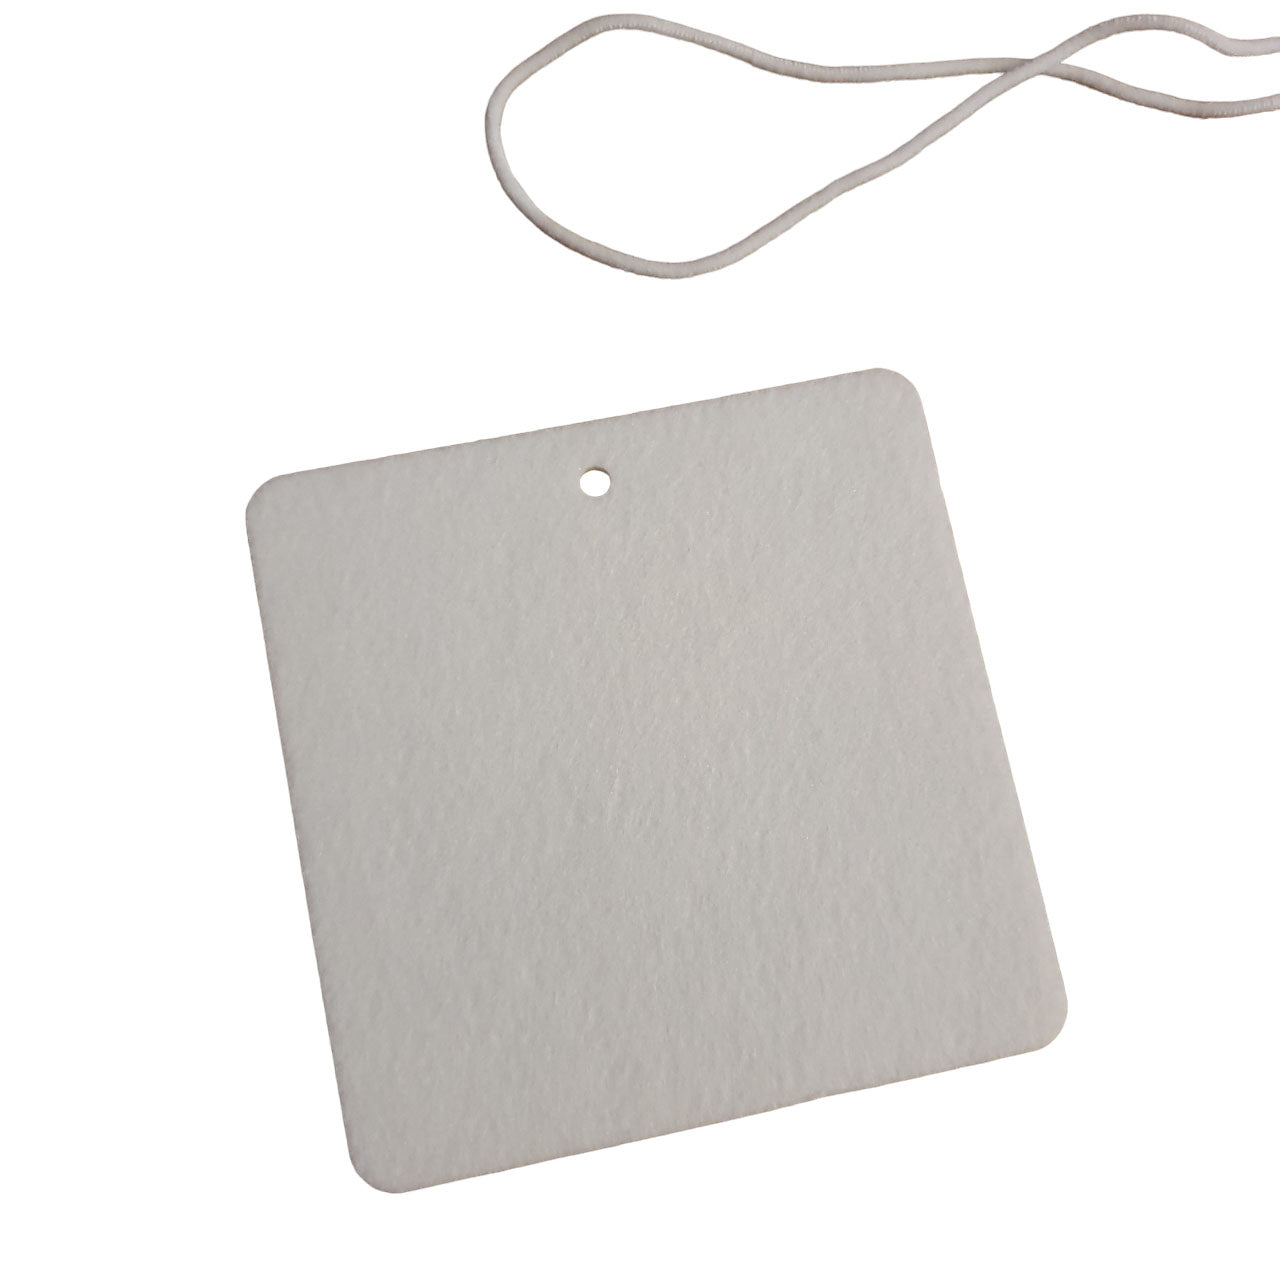 blank square car air freshener with elasticated cord